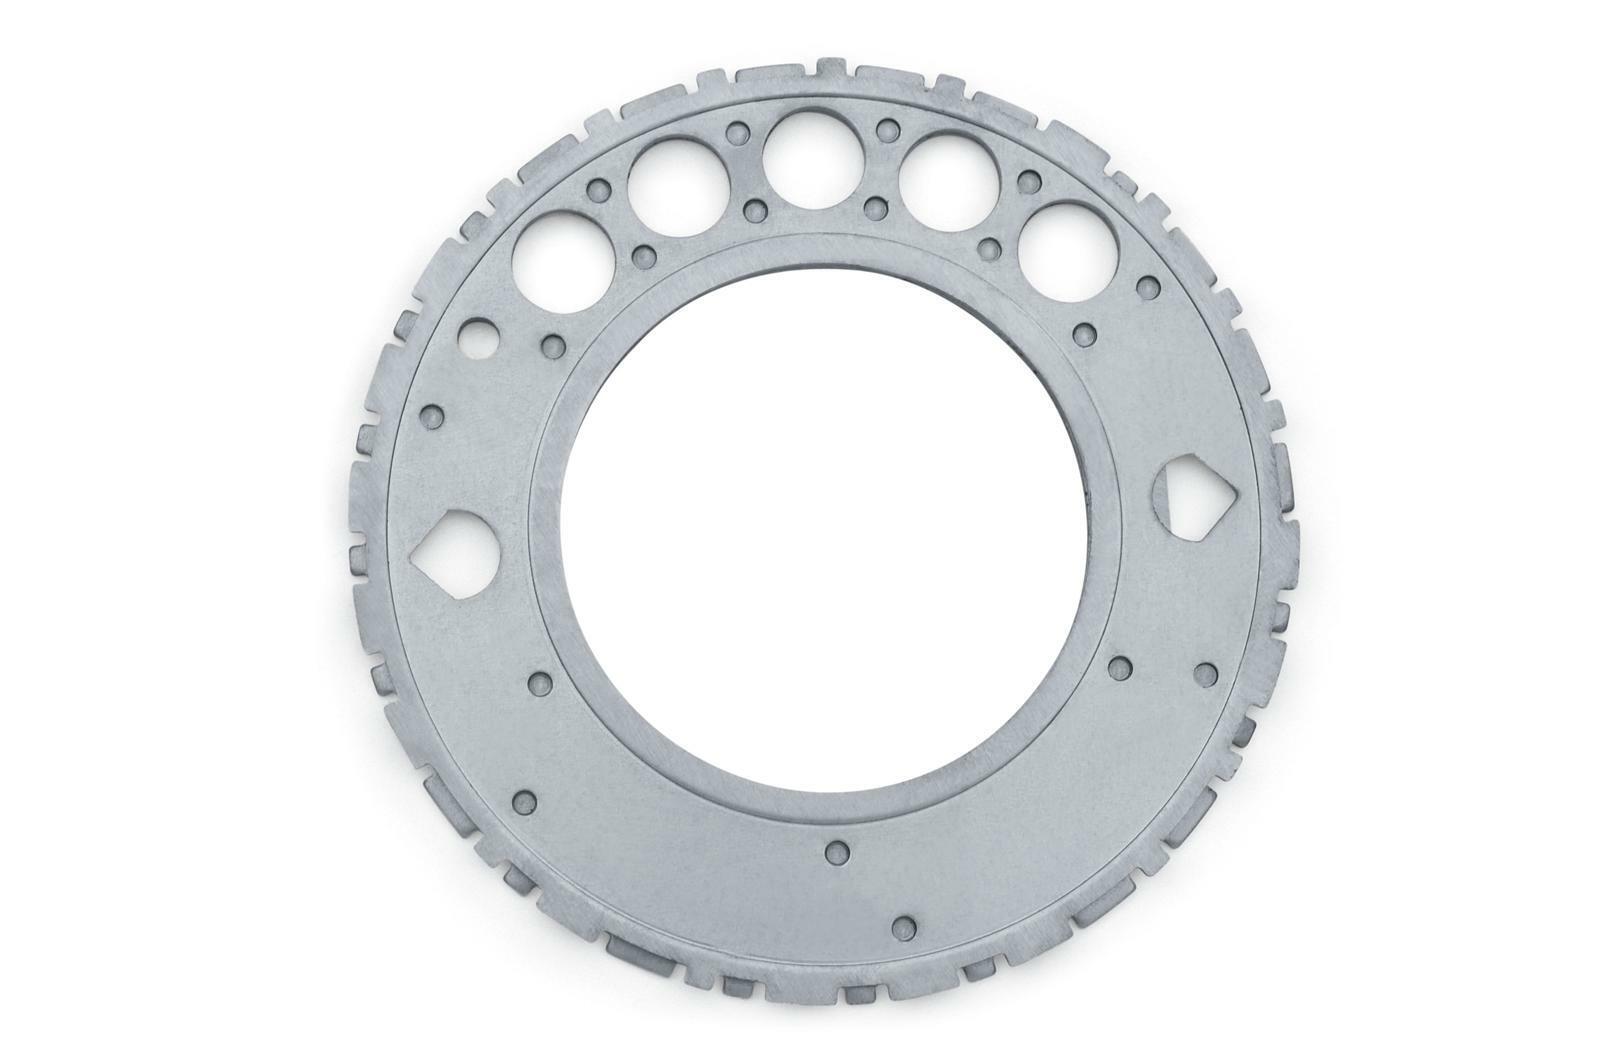 Callies 12559353 Gm Ls Oem 24 Tooth Reluctor Wheel